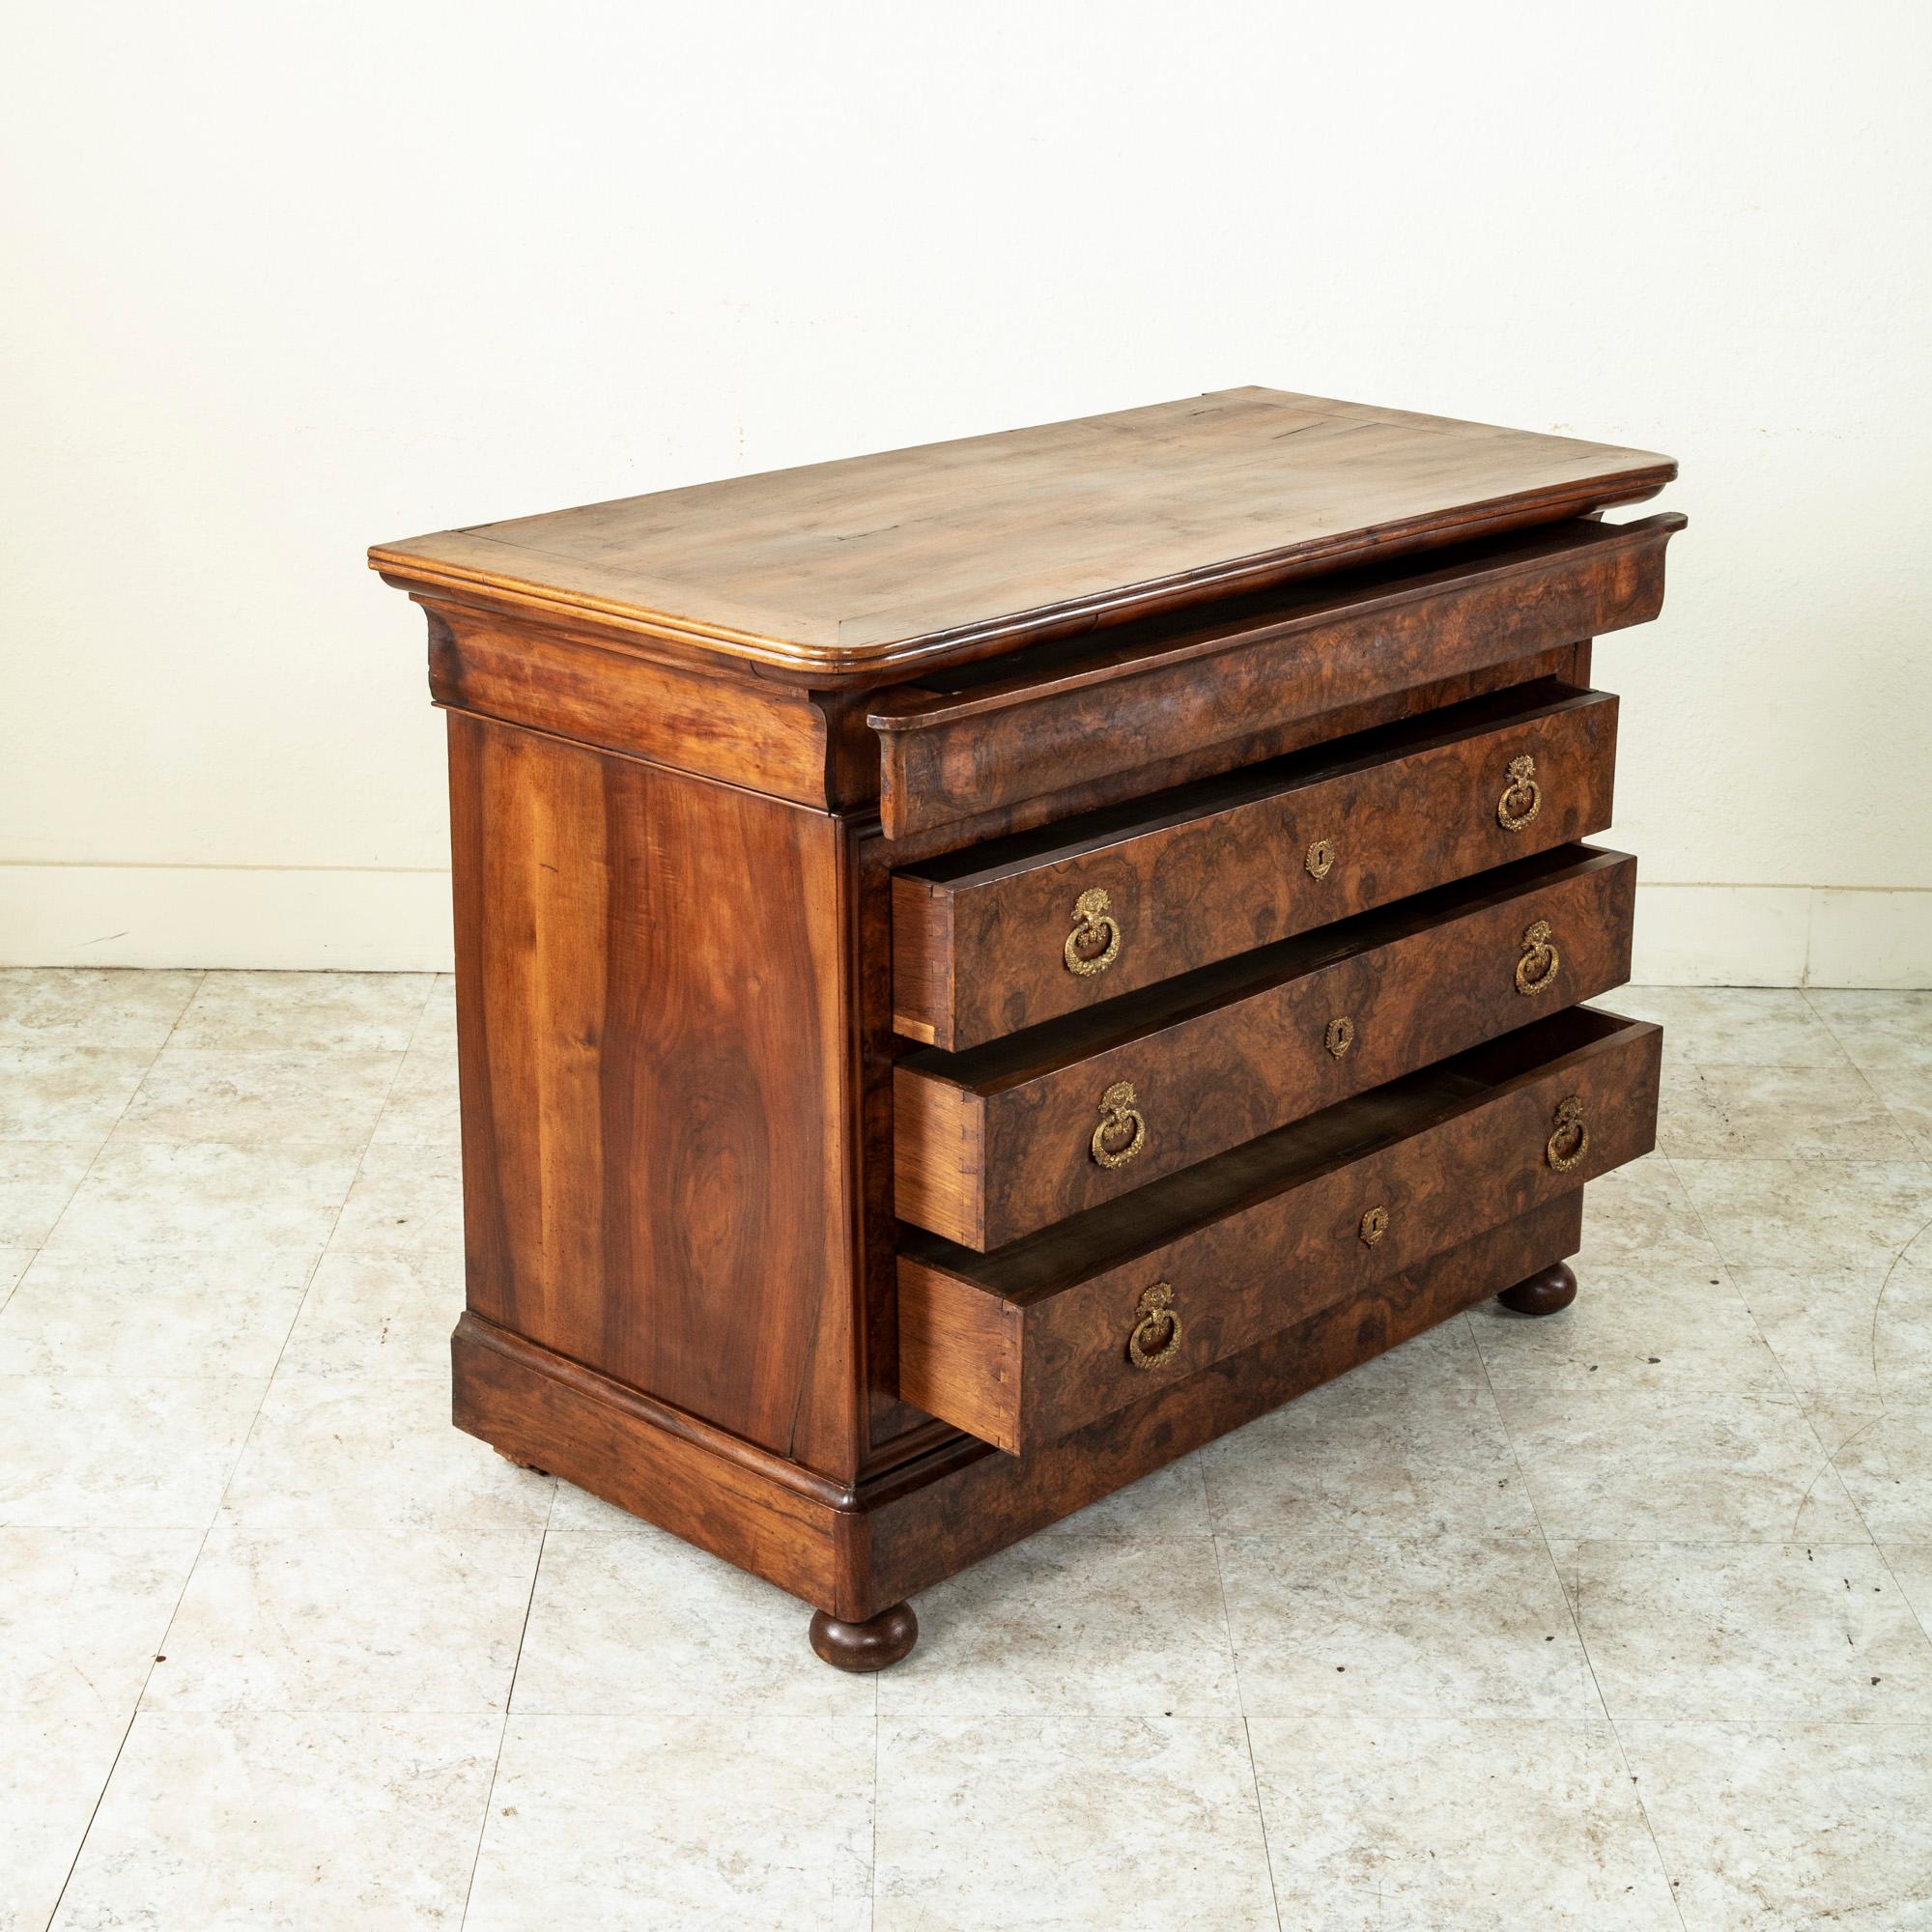 Mid-19th Century French Restauration Period Burl Walnut Chest of Drawers For Sale 3